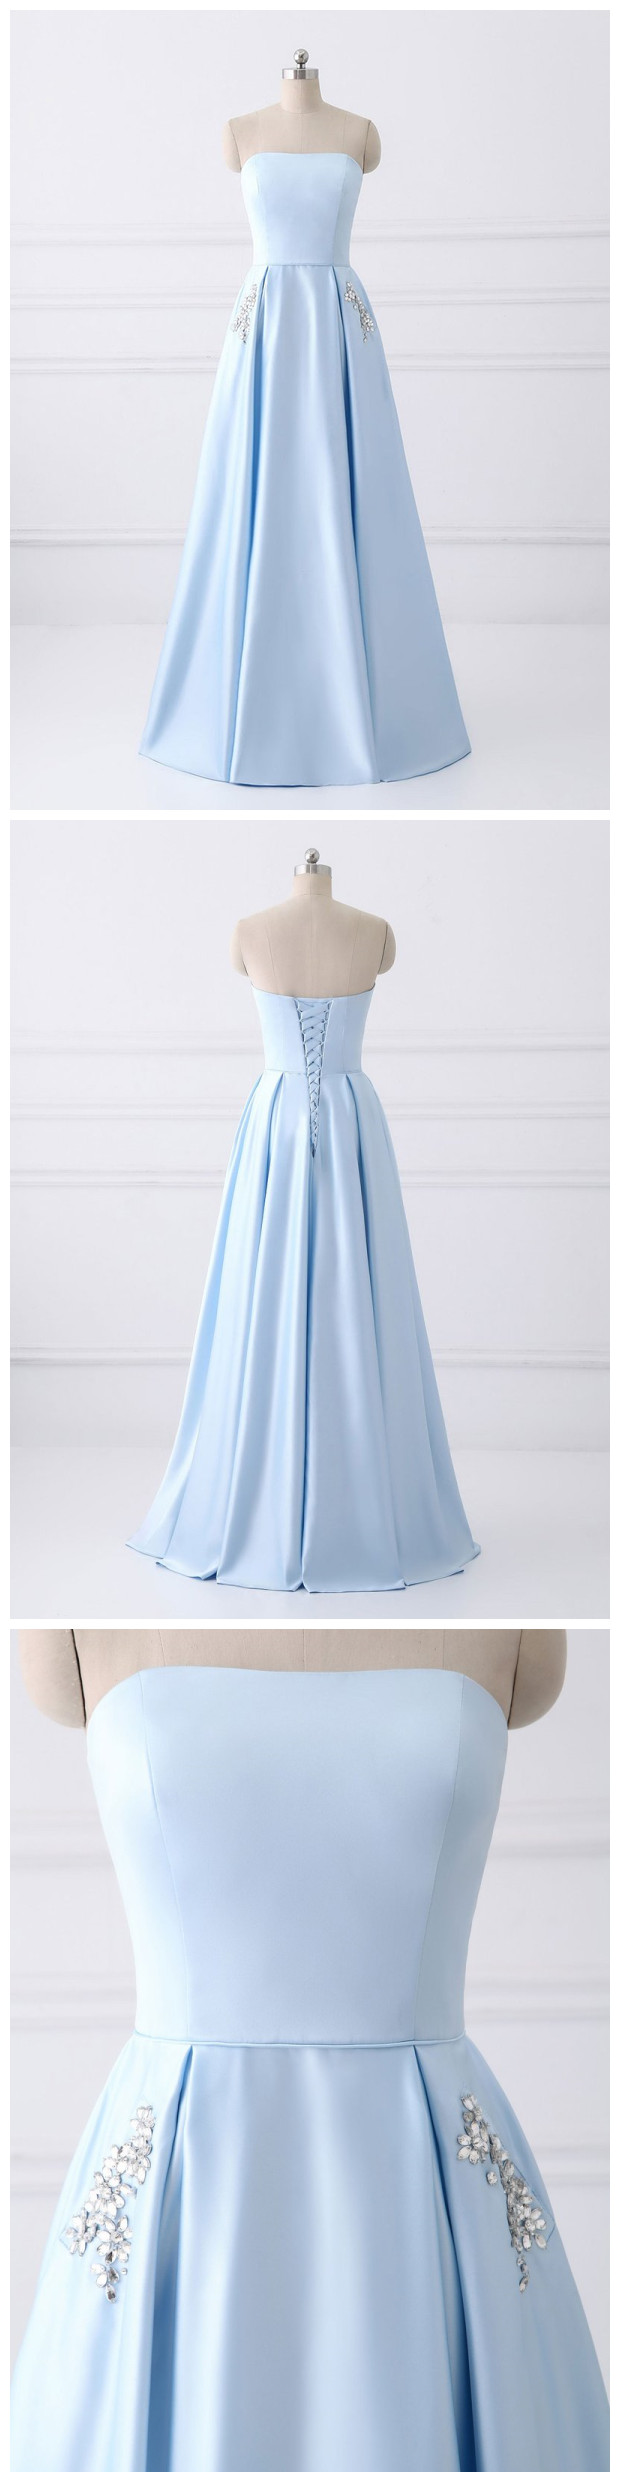 A-line Strapless Simple Long Prom Dresses With Pocket